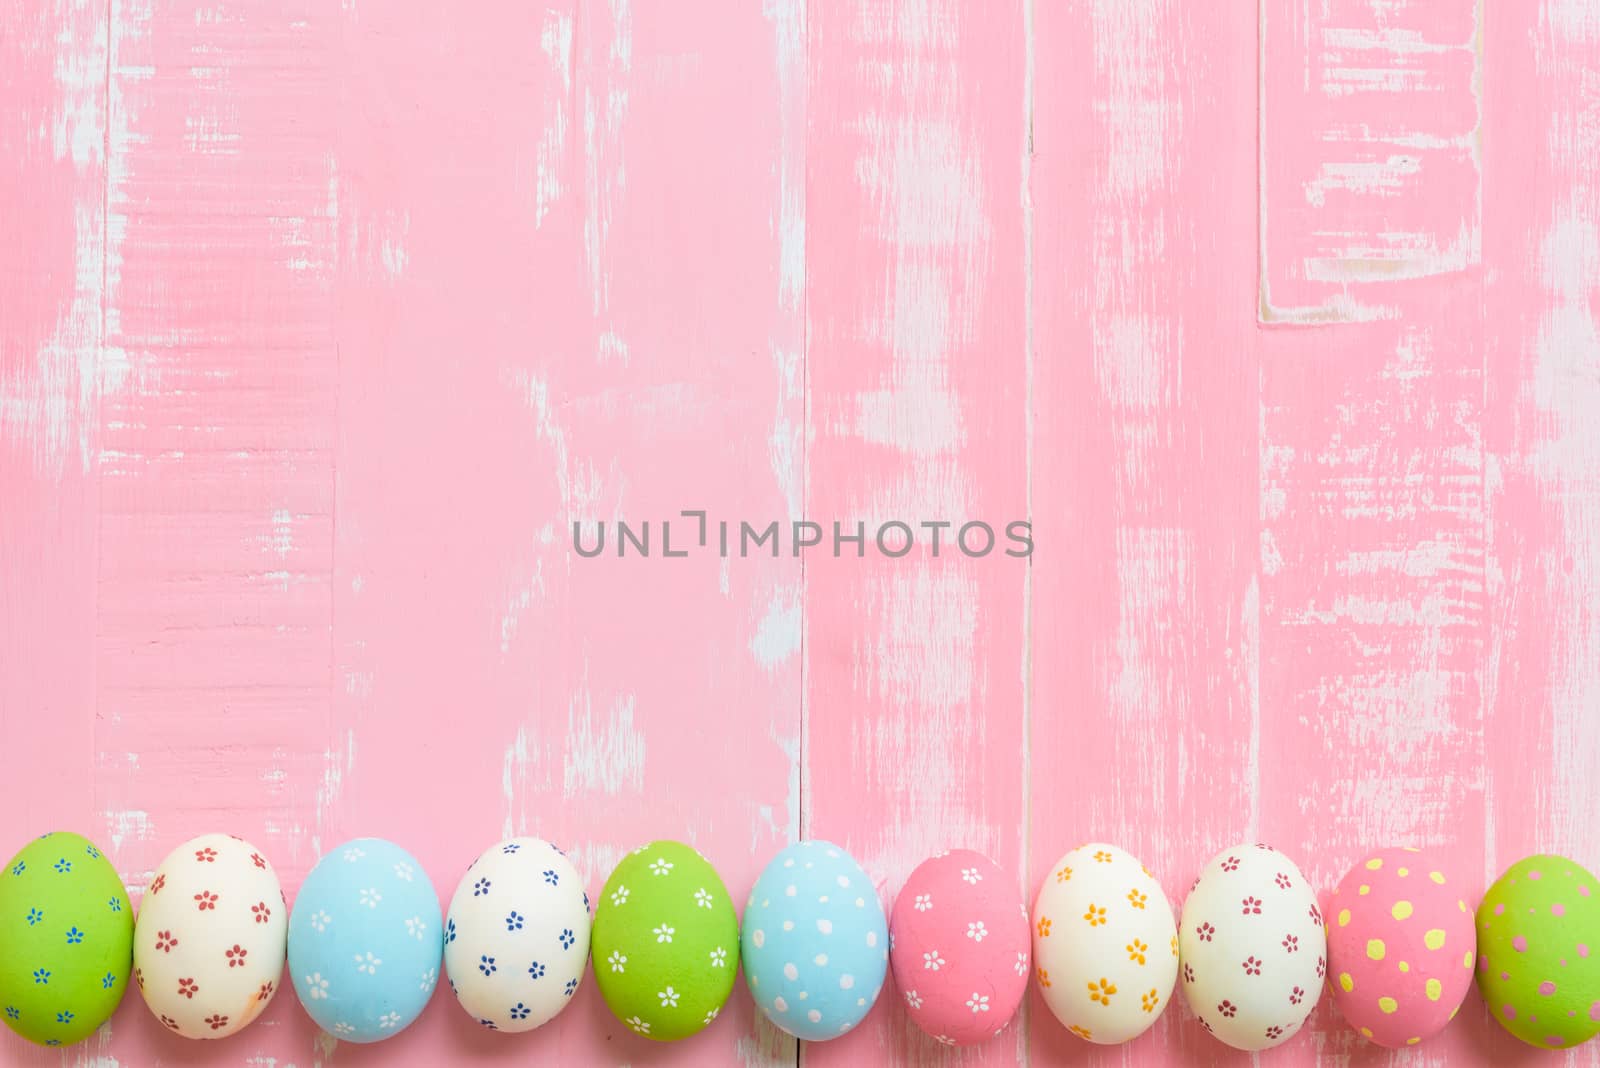 Happy easter! Row Easter eggs with colorful paper flowers on bright pink wooden background.